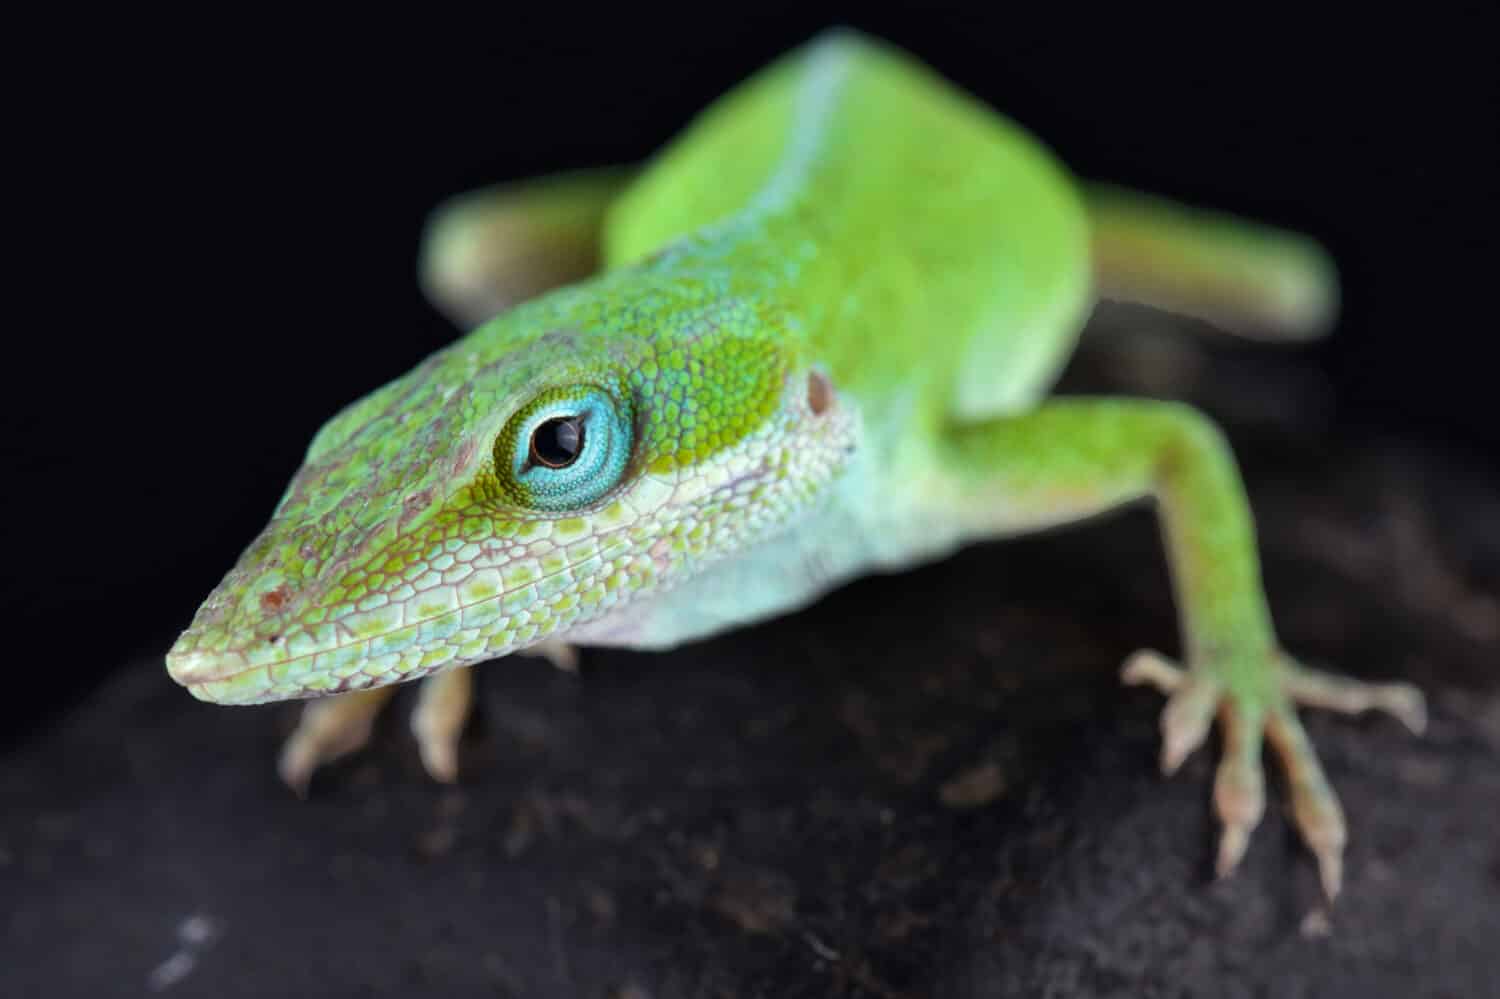 The Carolina anole (Anolis carolinensis) is an arboreal anole lizard native to the southeastern United States (west to Texas) and introduced elsewhere.